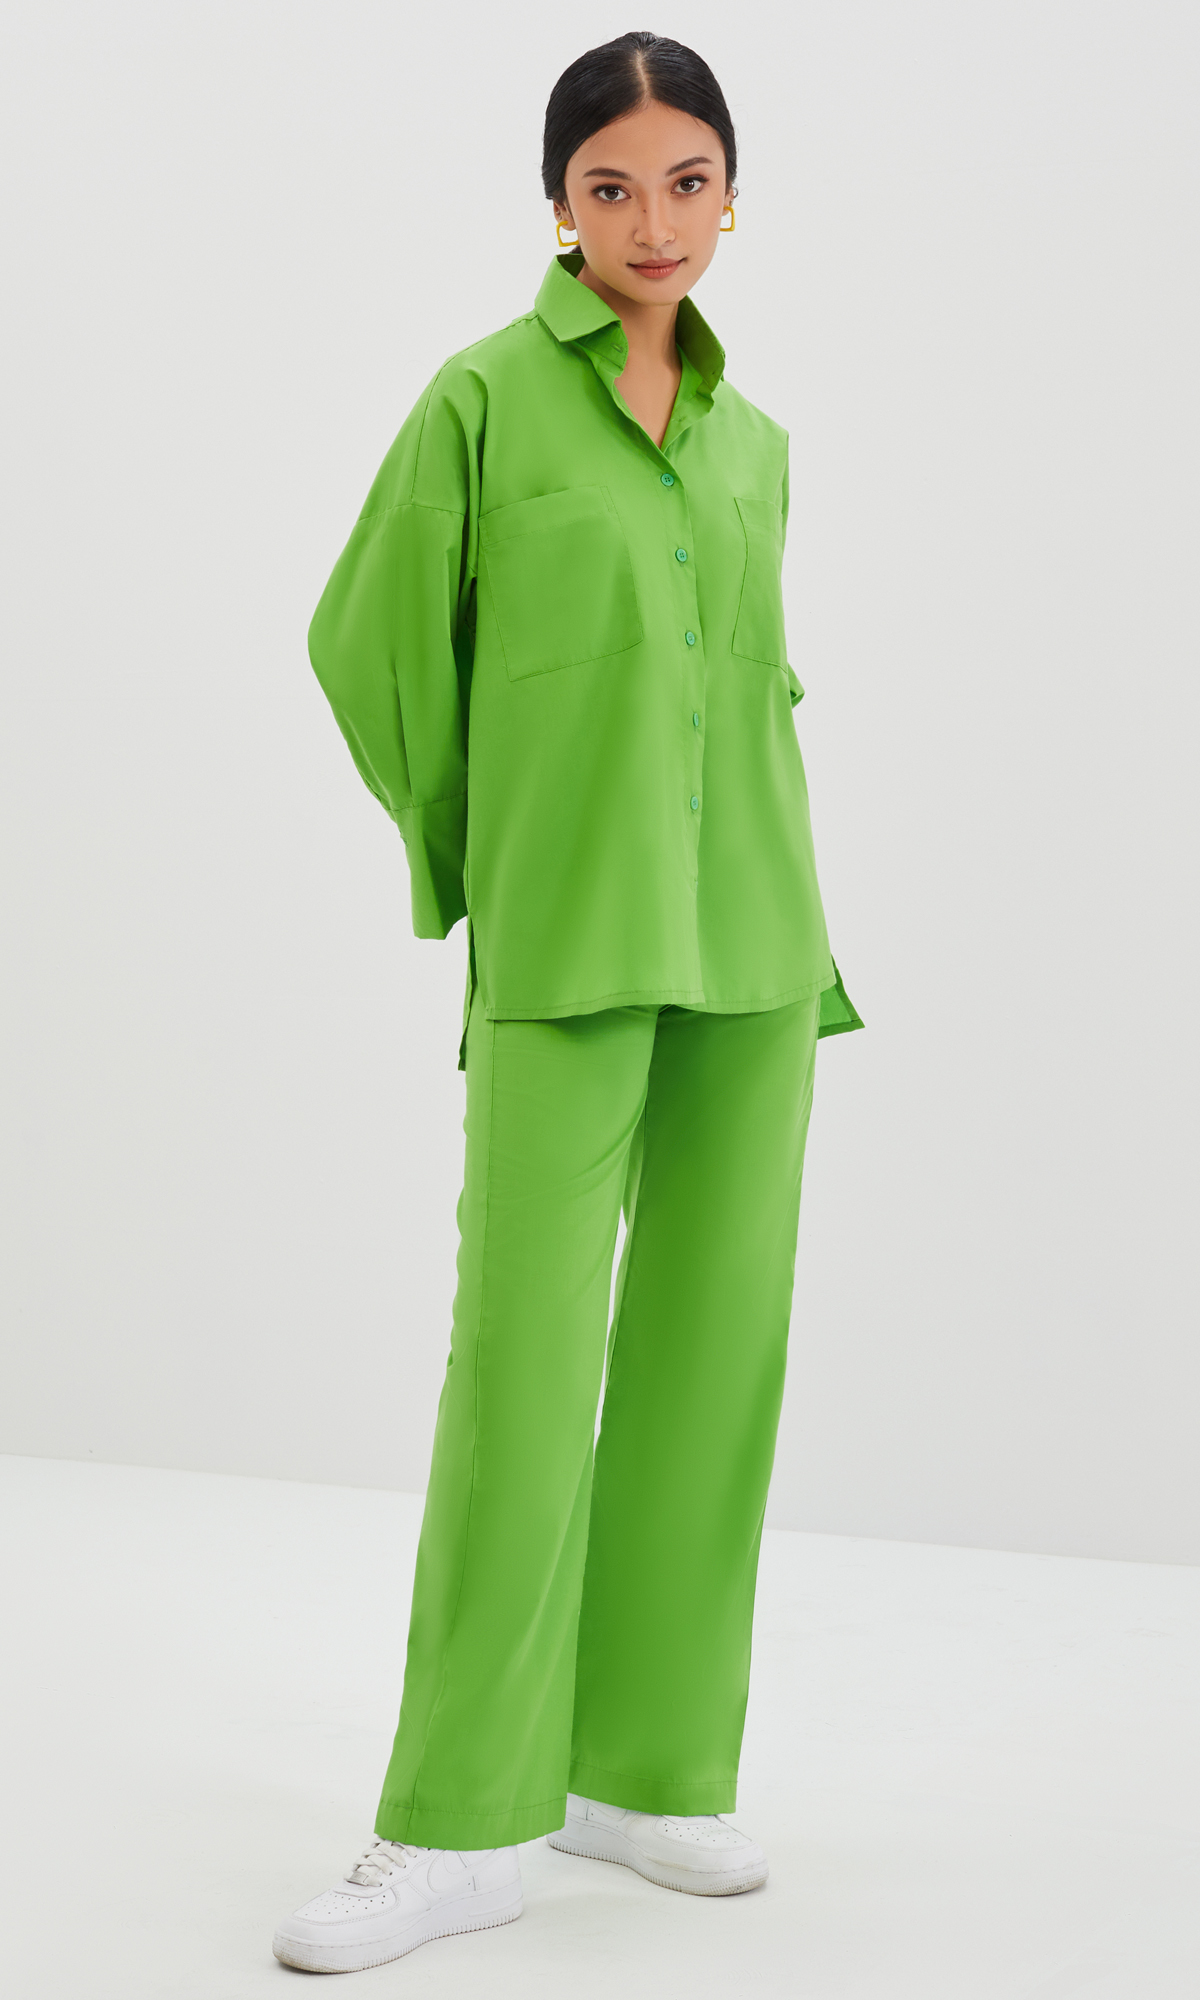 Astrid Set in Lime Green